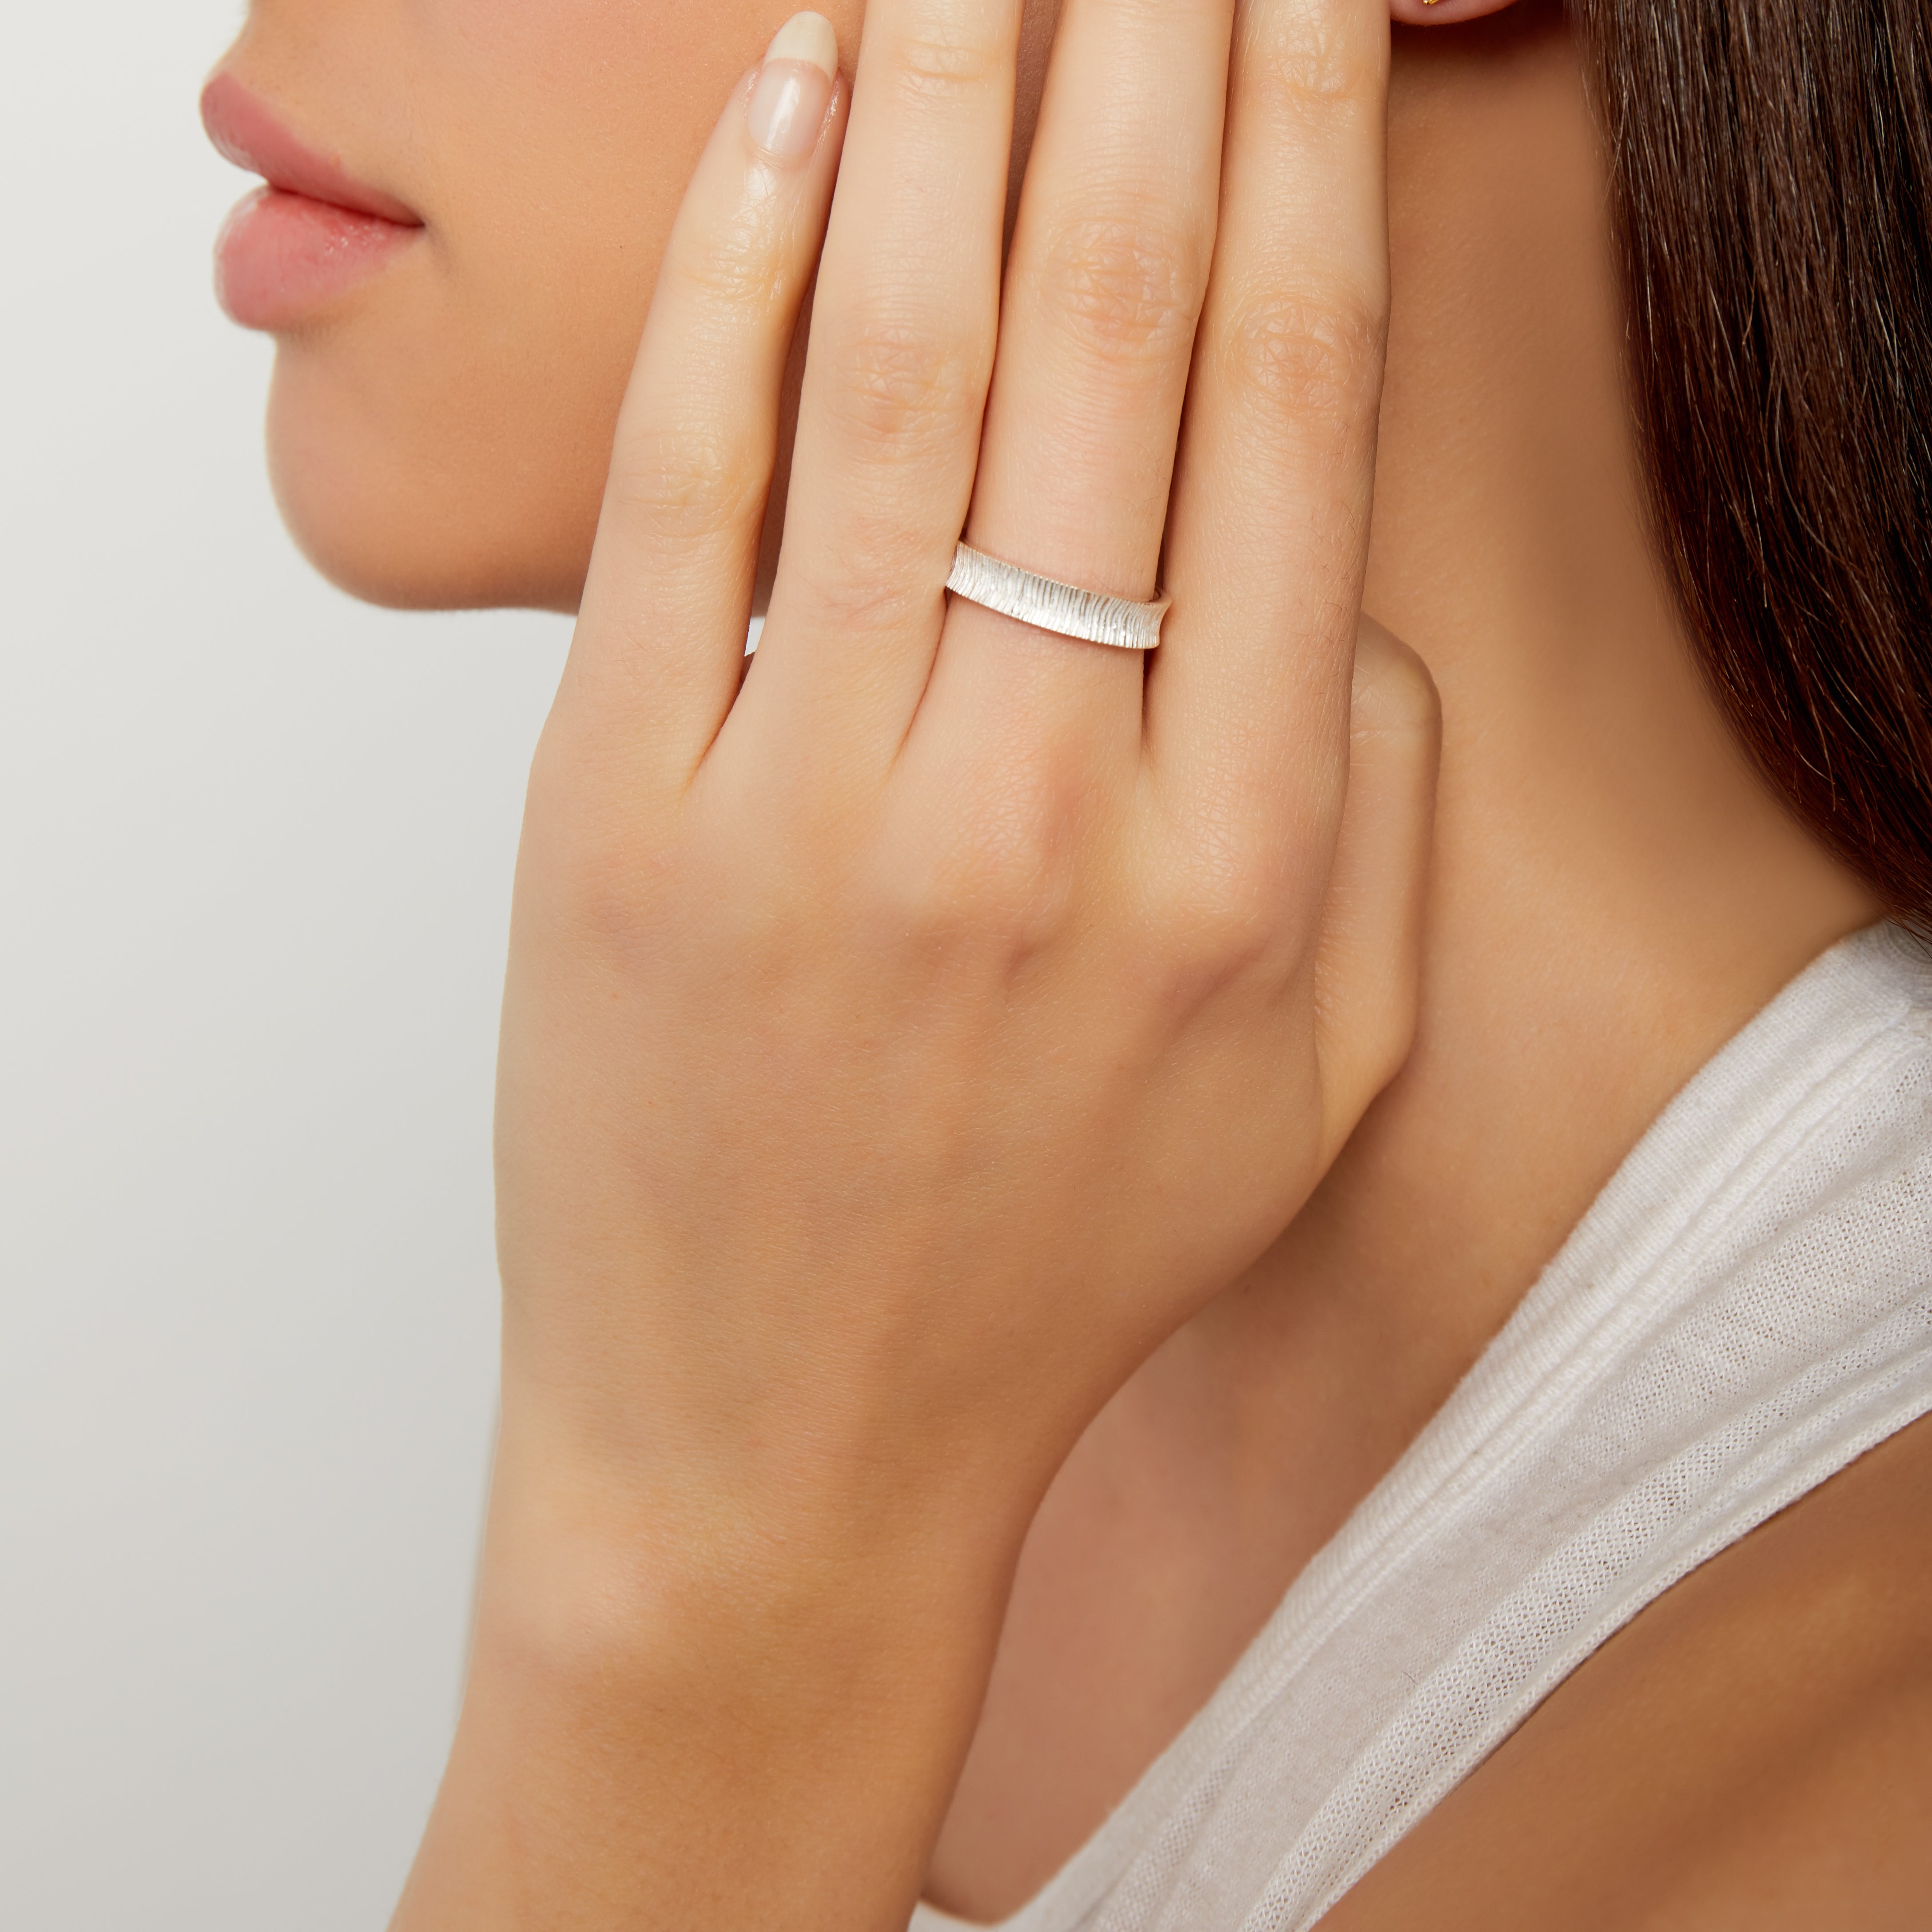 THE TEXTURED BAND RING